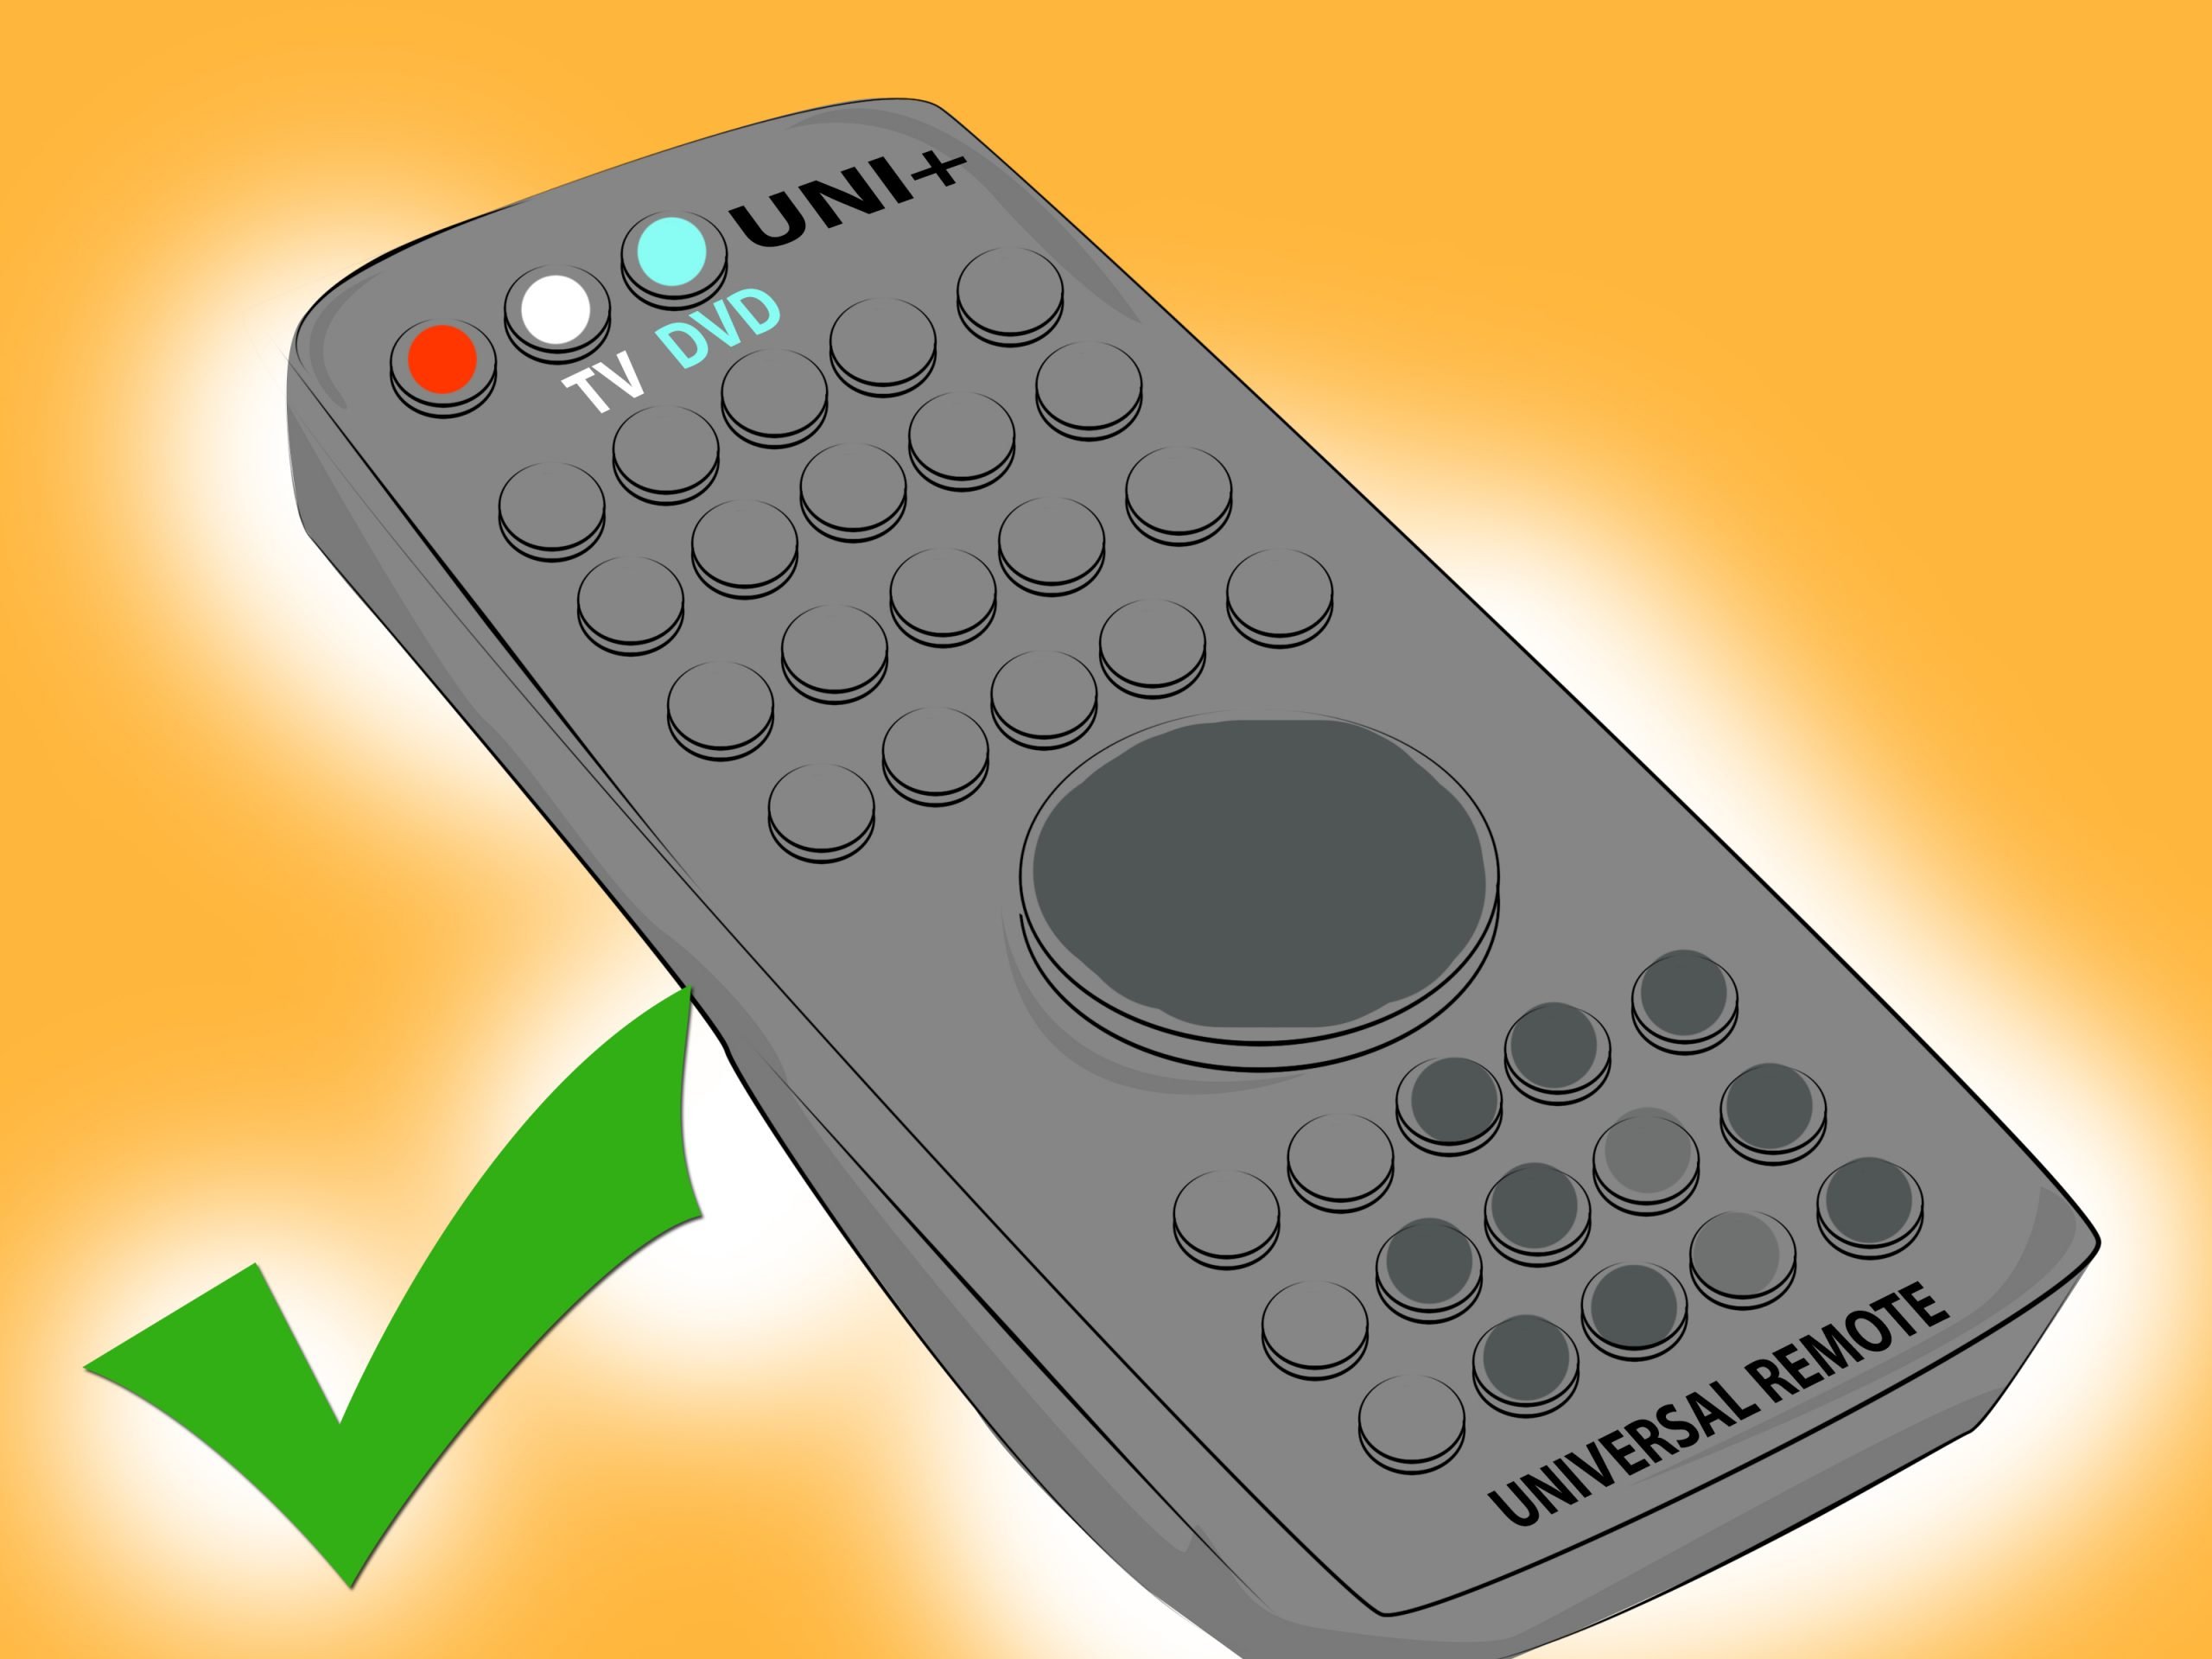 3 Ways to Find a Lost Television Remote